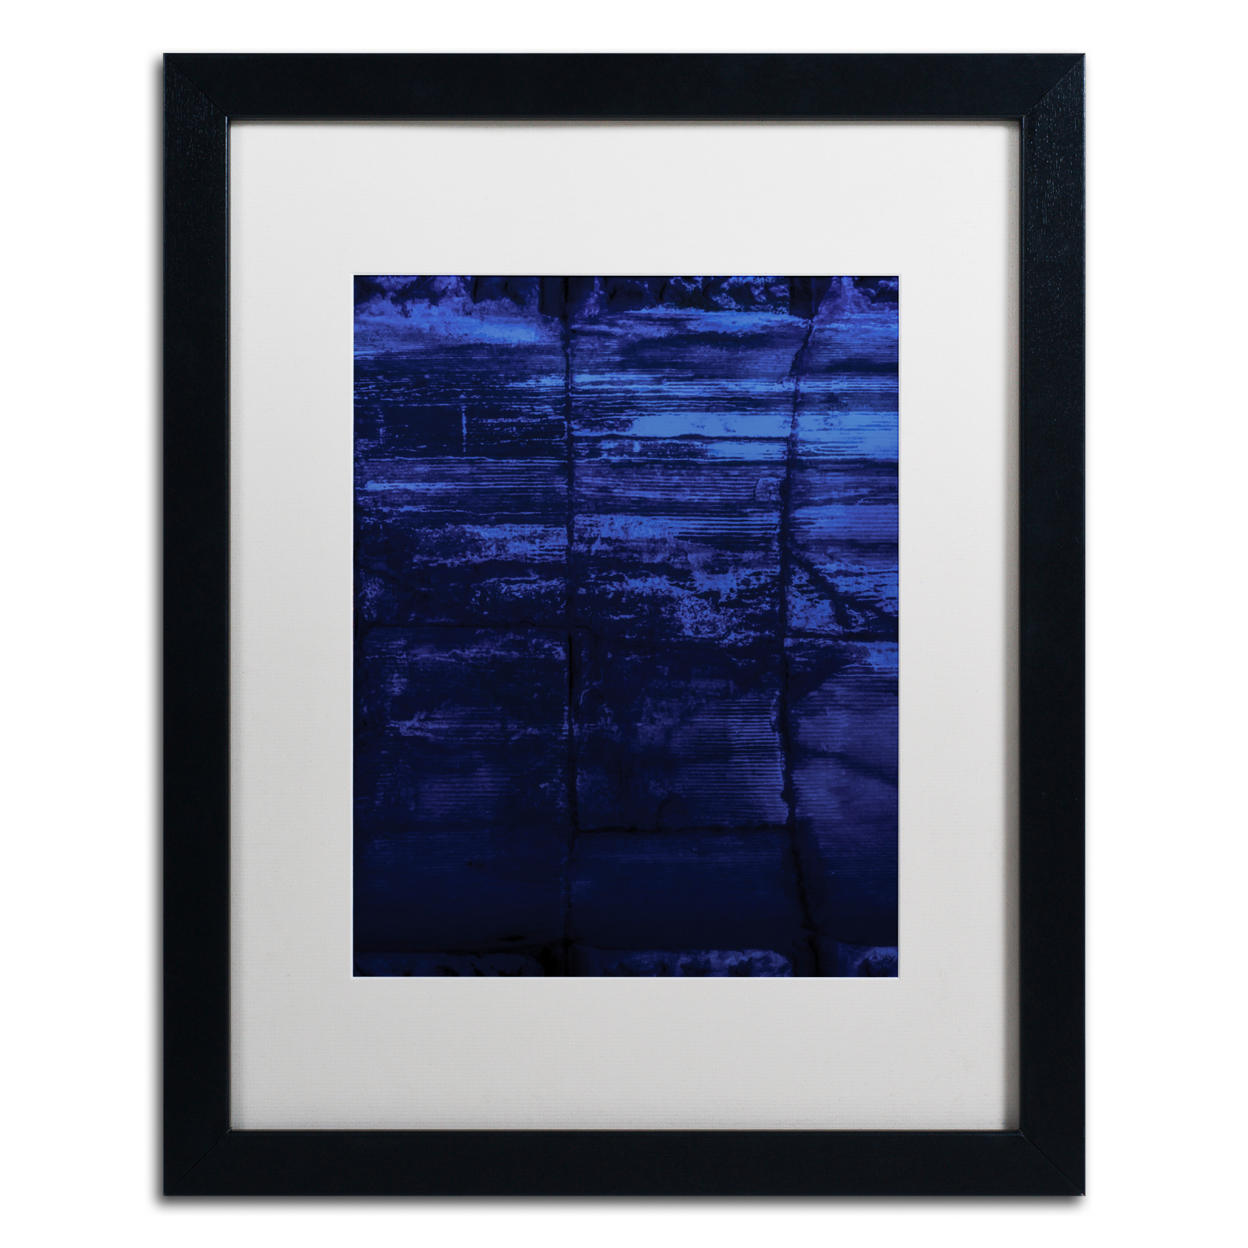 Claire Doherty 'Blocks Of Blue' Black Wooden Framed Art 18 X 22 Inches